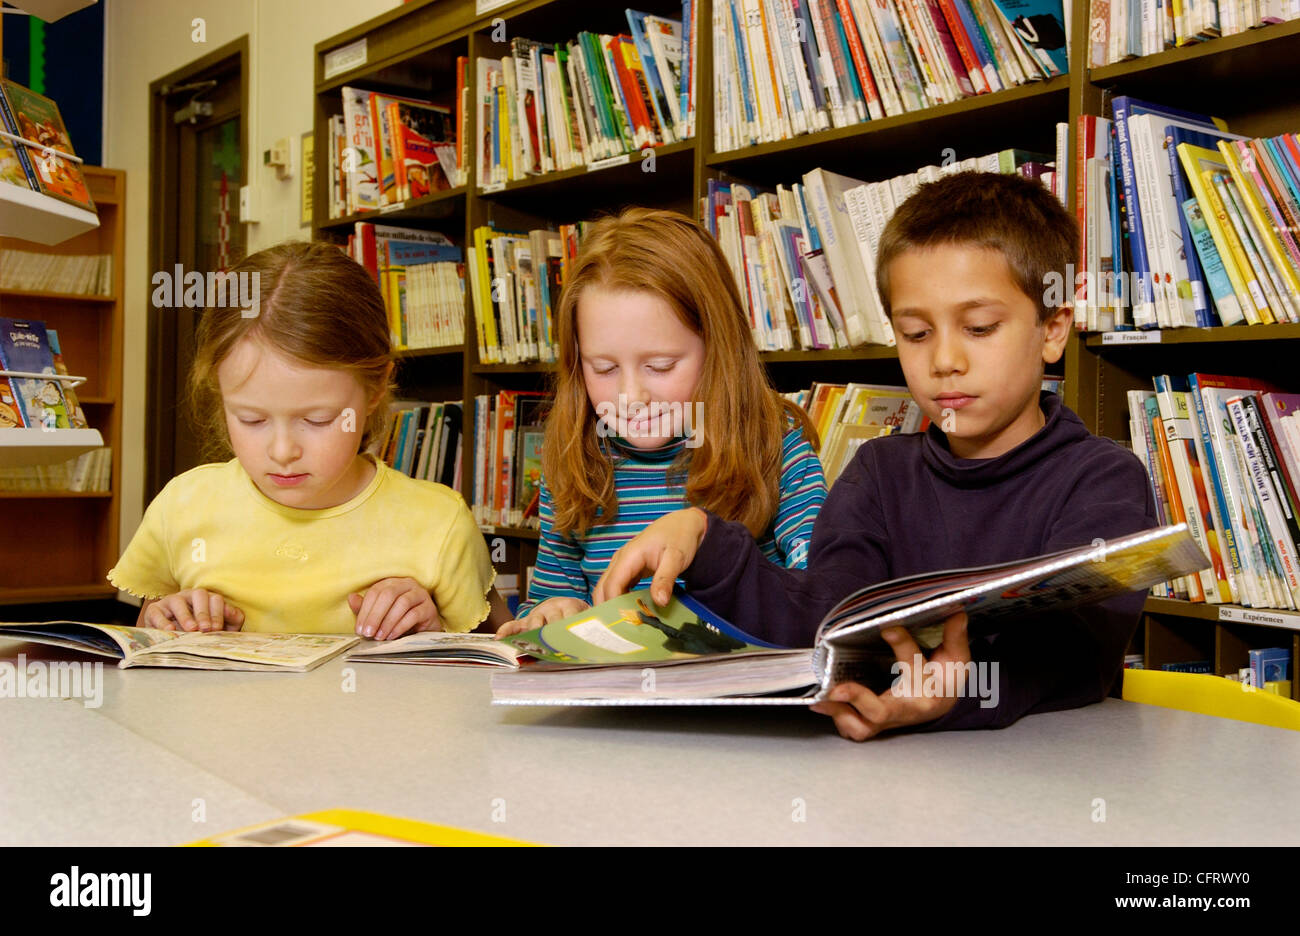 Eight Year Old Boy and Girls in School Library Stock Photo